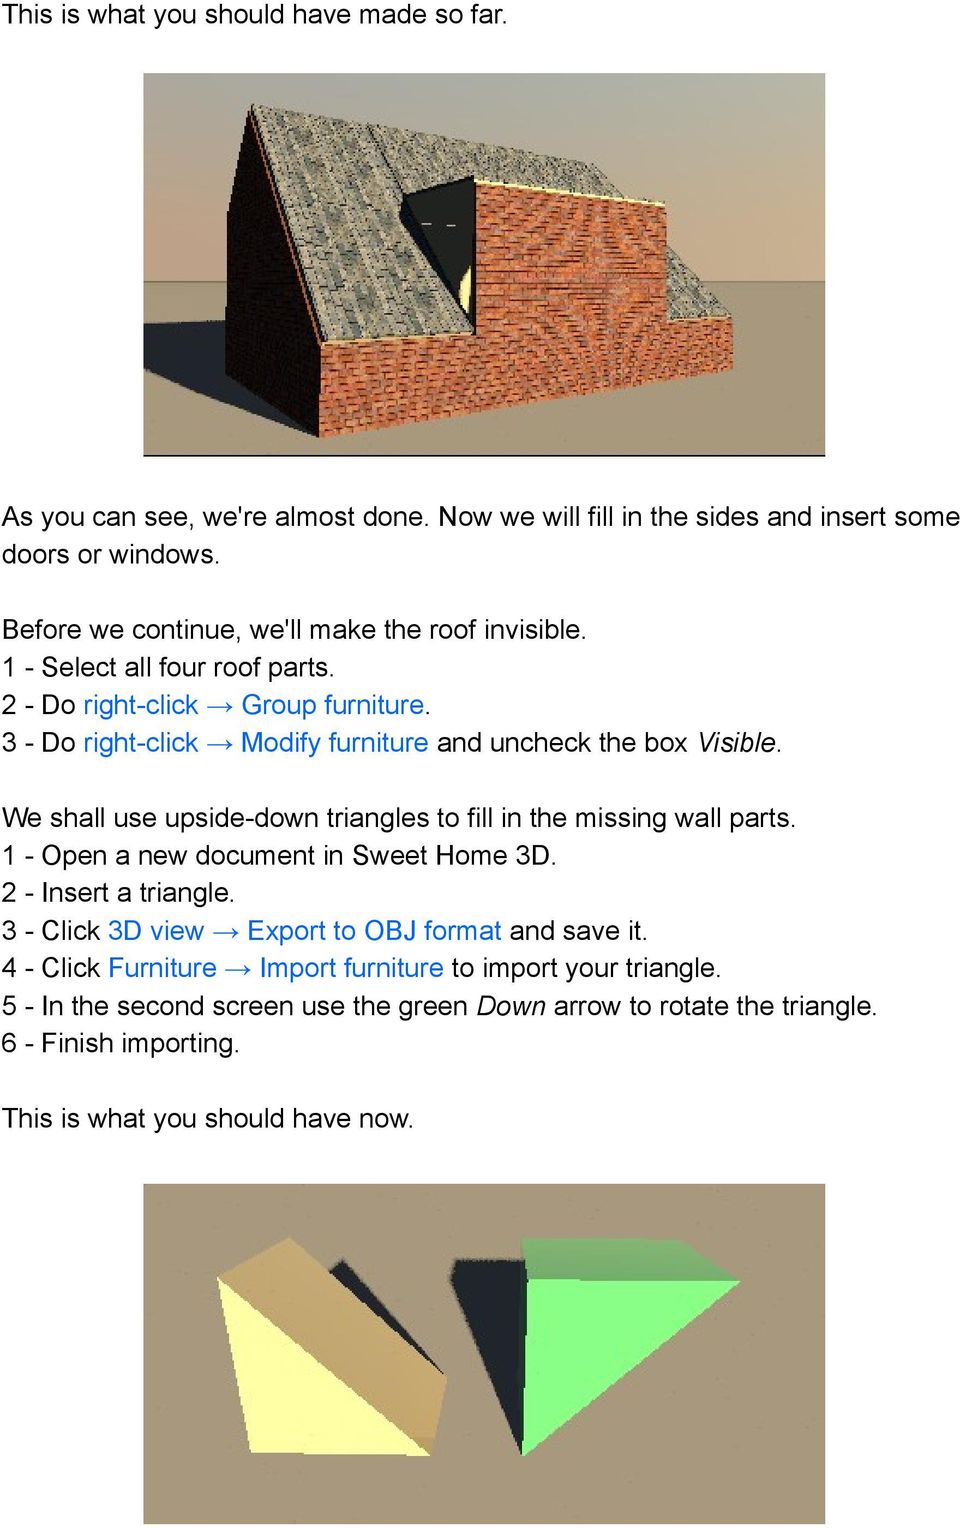 3 - Do right-click Modify furniture and uncheck the box Visible. We shall use upside-down triangles to fill in the missing wall parts. 1 - Open a new document in Sweet Home 3D.